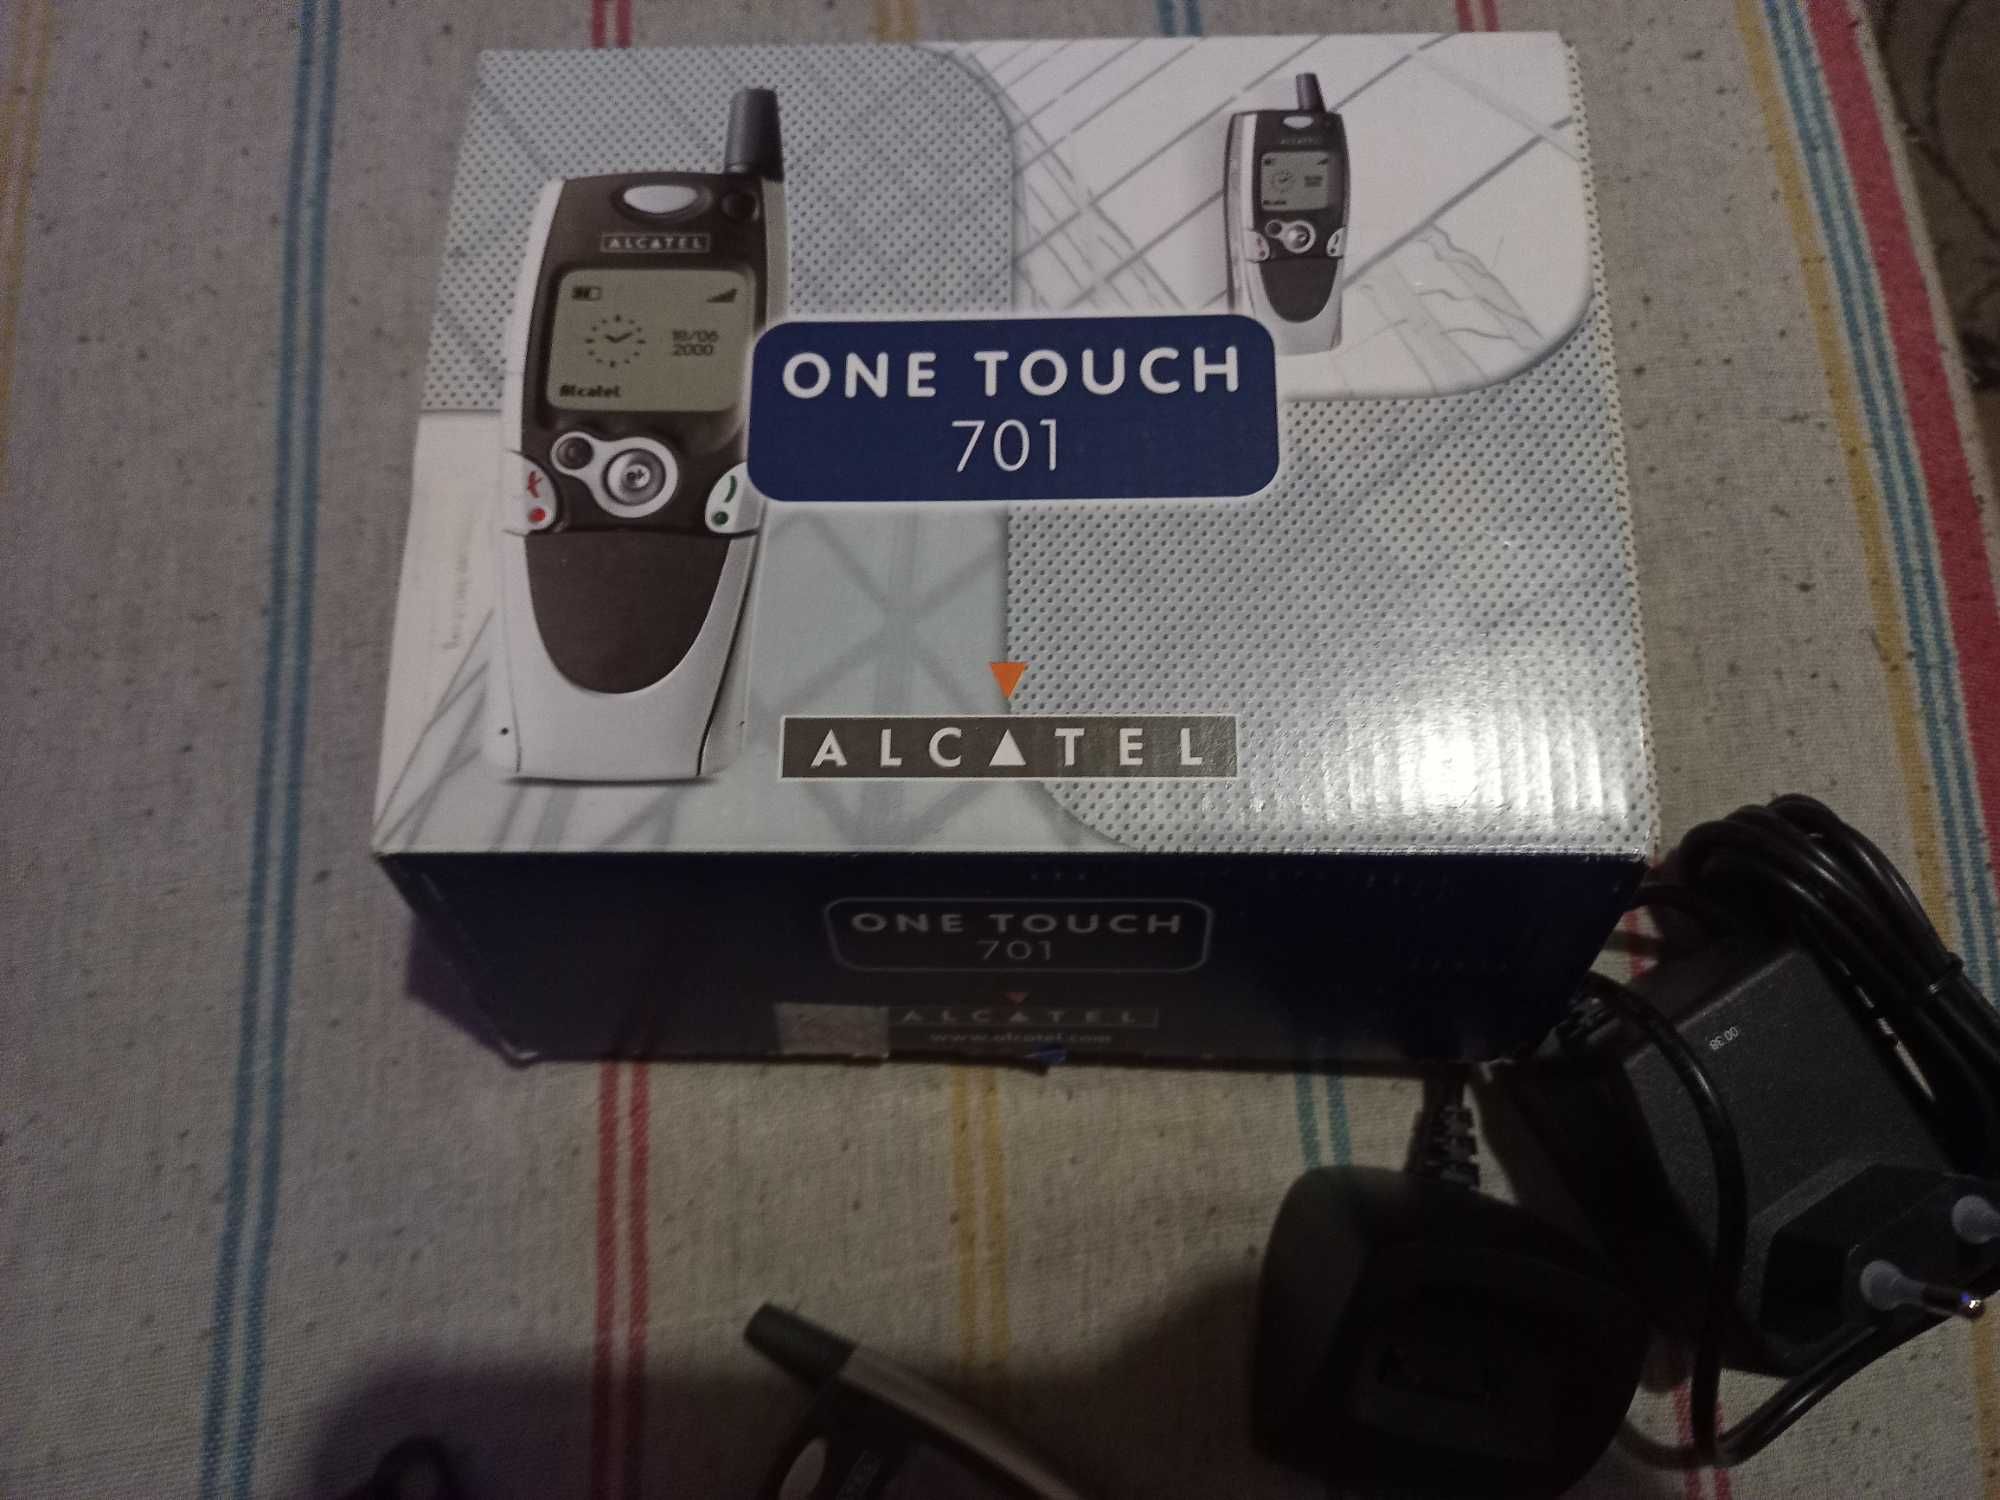 Alcatel One Touch 701